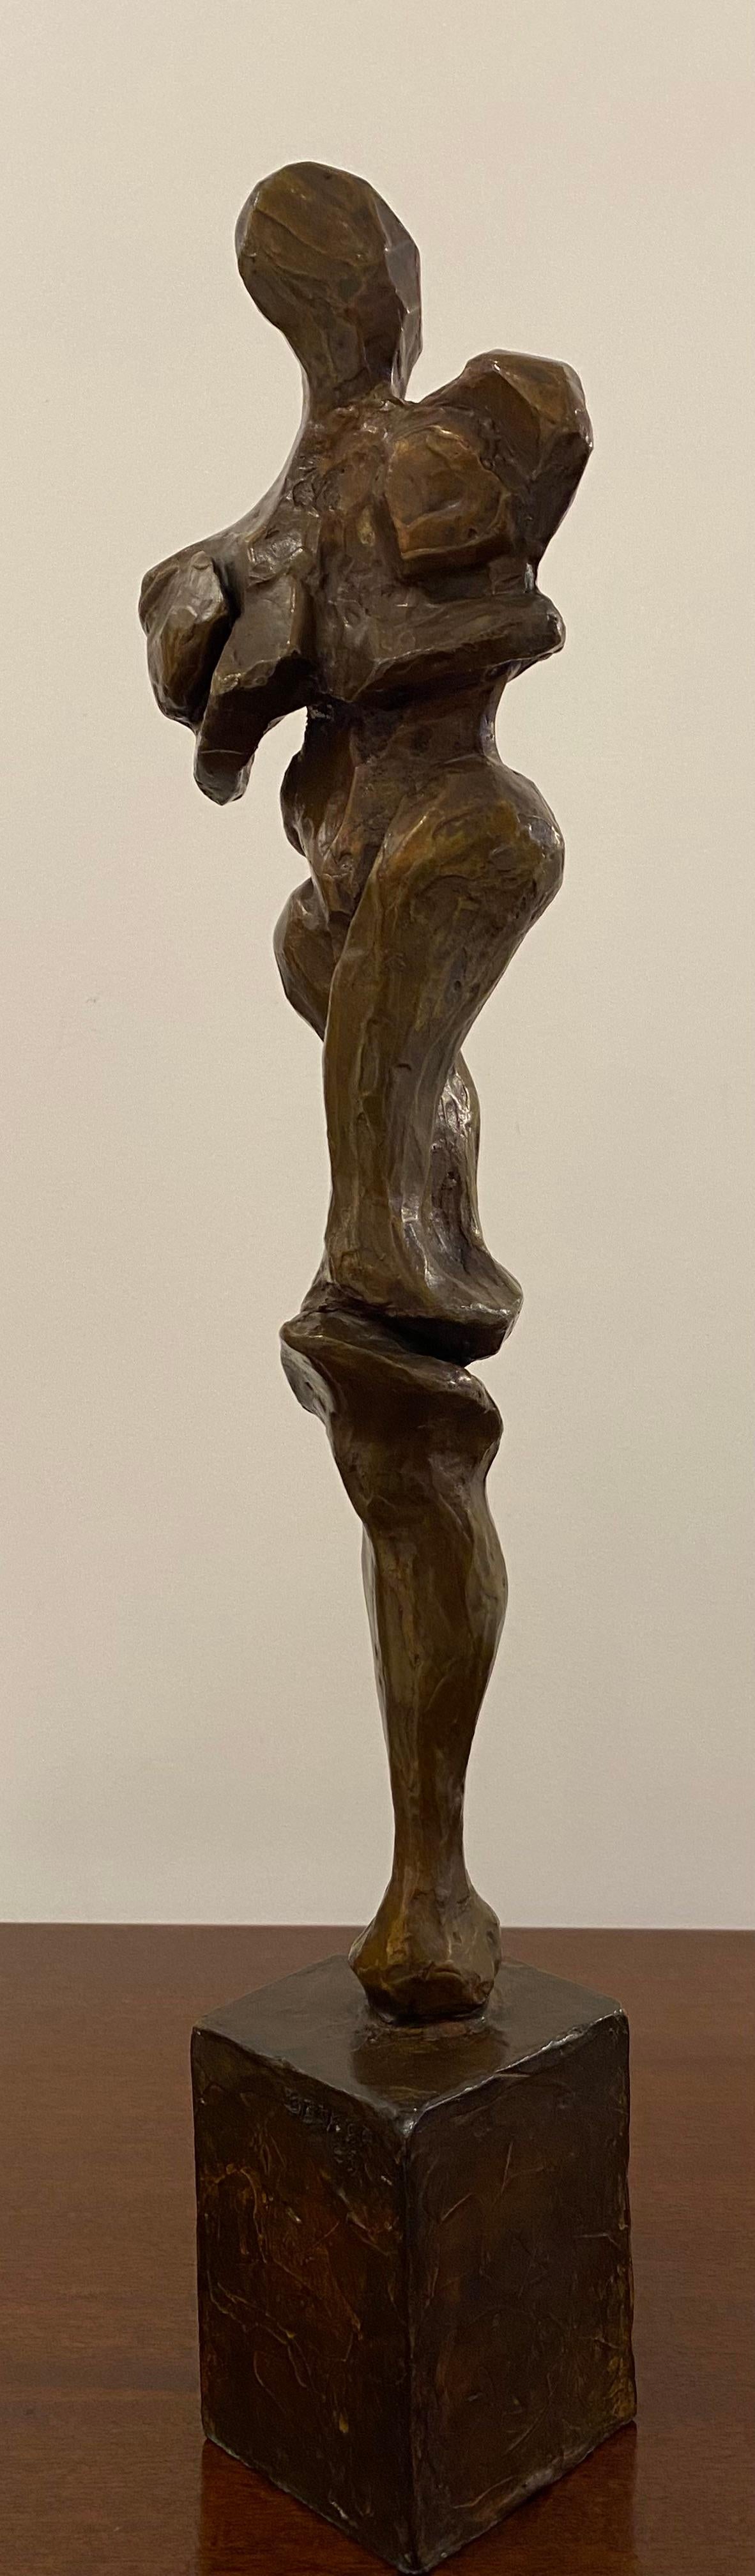 Mid-20th Century Abstracted Figure in Bronze by Sanford 'Sandy' Decker For Sale